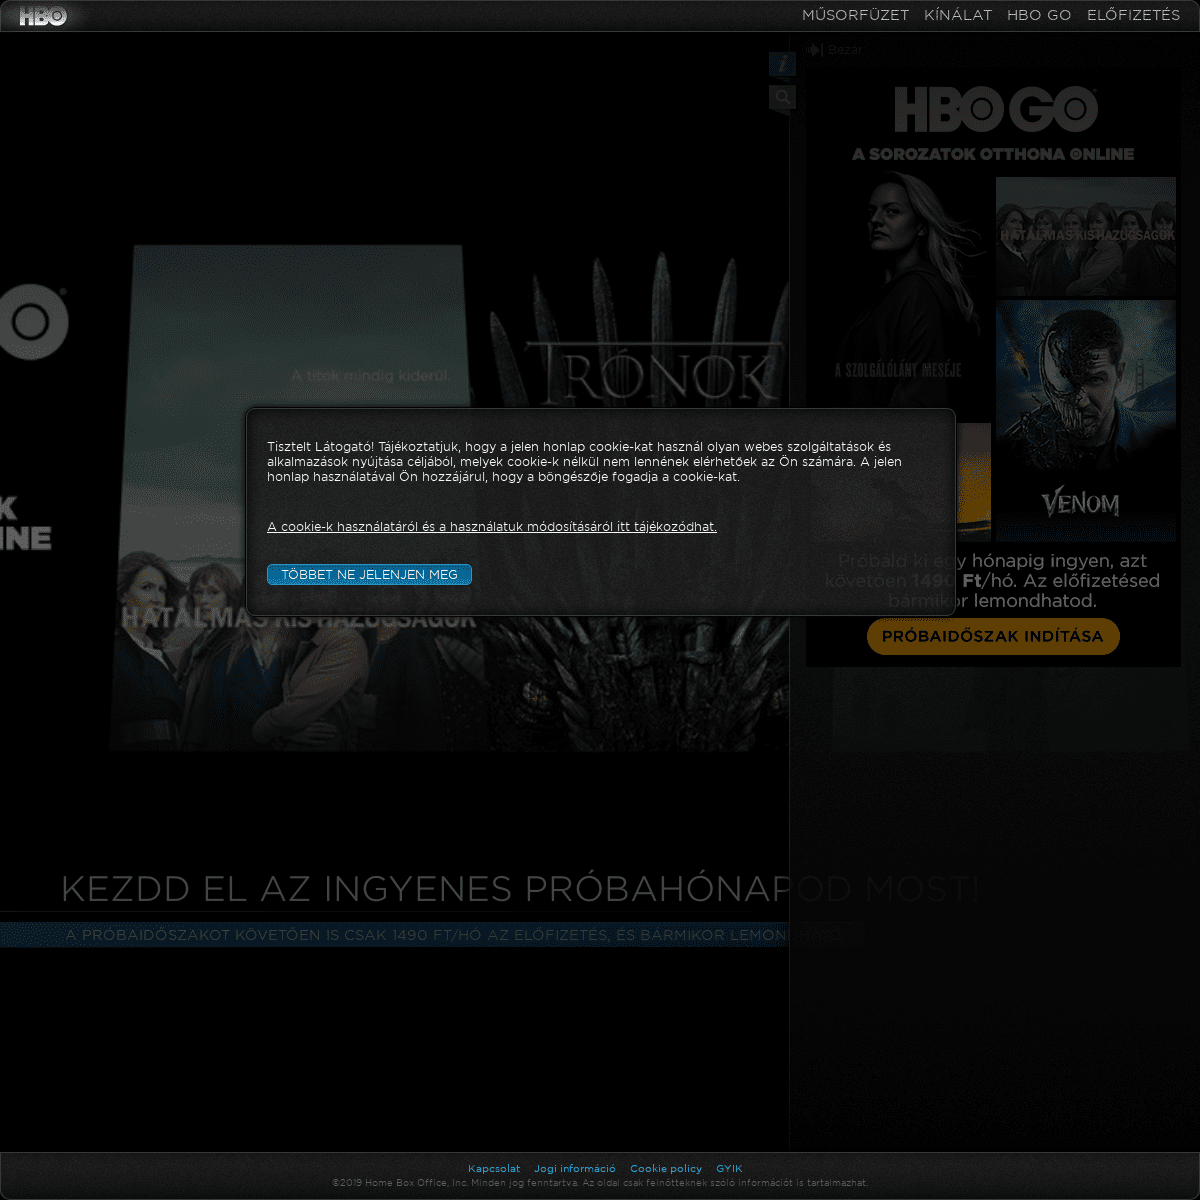 A complete backup of hbo.hu